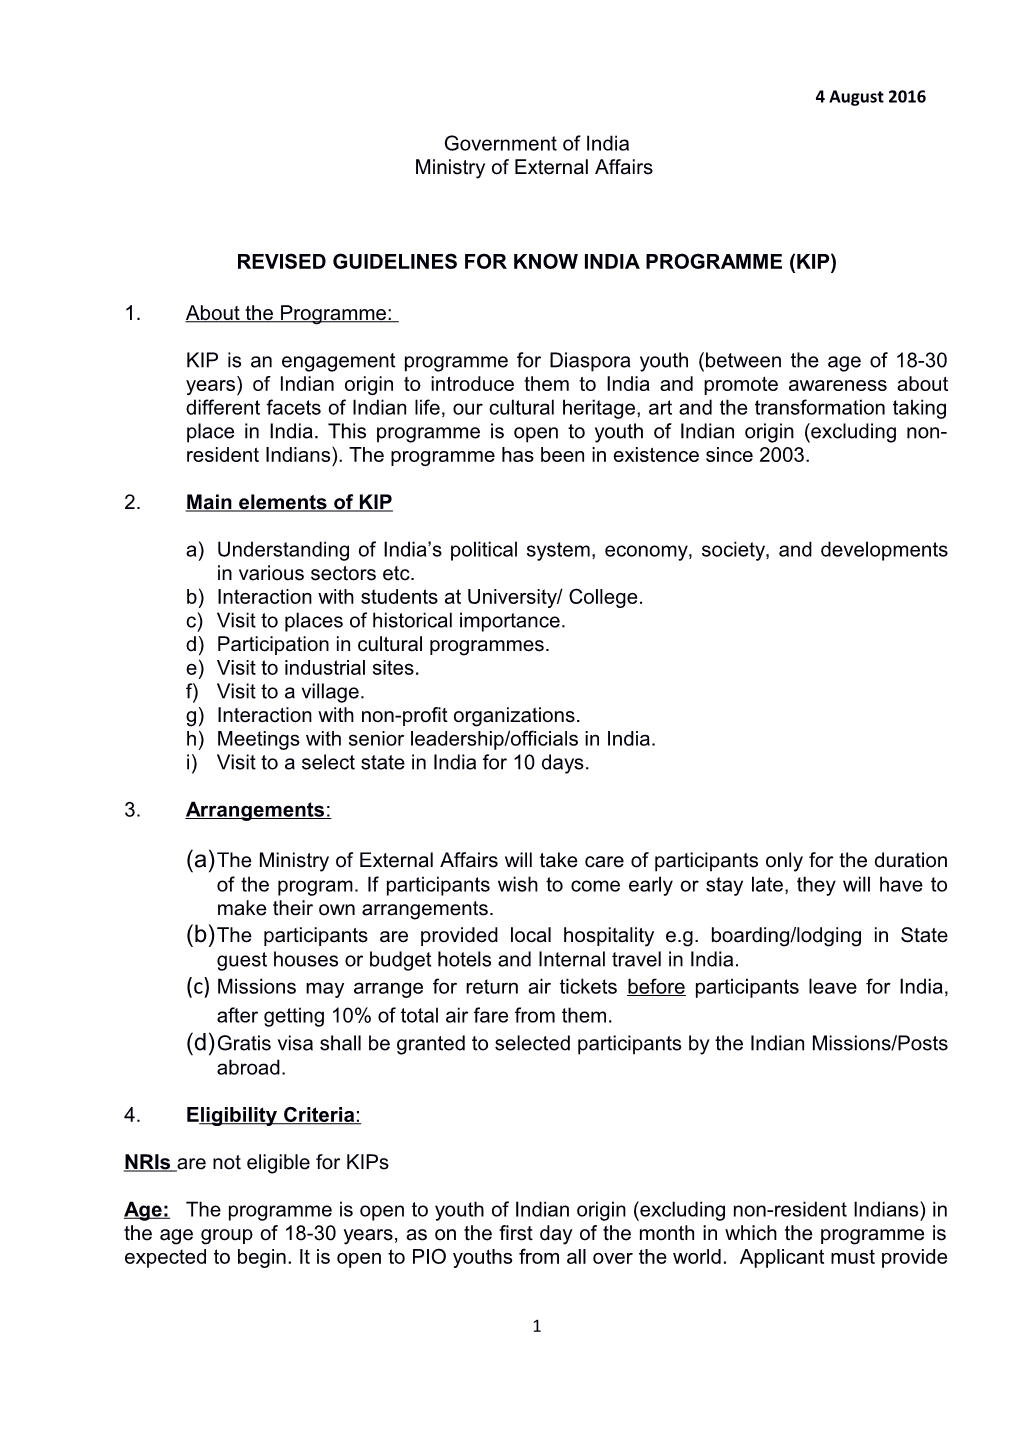 Revised Guidelines for Know India Programme (Kip)